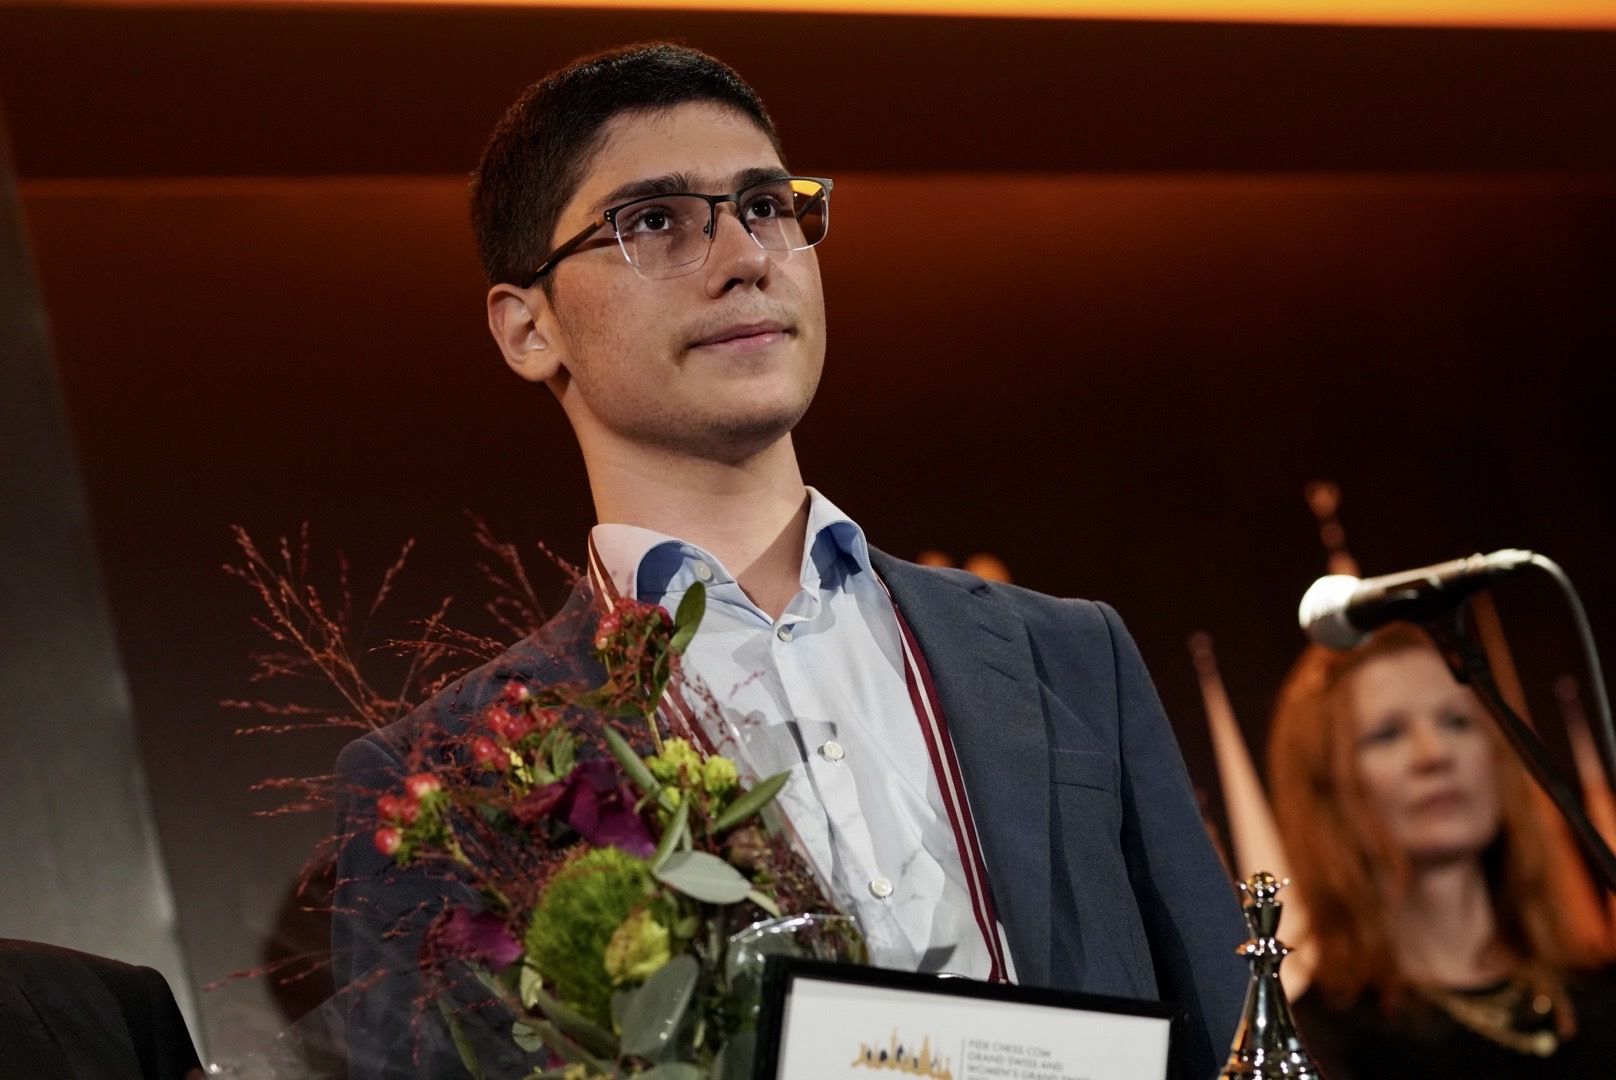 International Chess Federation on X: Throwback to the 2021  #FIDEGrandSwiss! The event was won by Alireza Firouzja @AlirezaFirouzja,  who scored 8/11 with a rating performance of 2855 and a 11.5 rating point